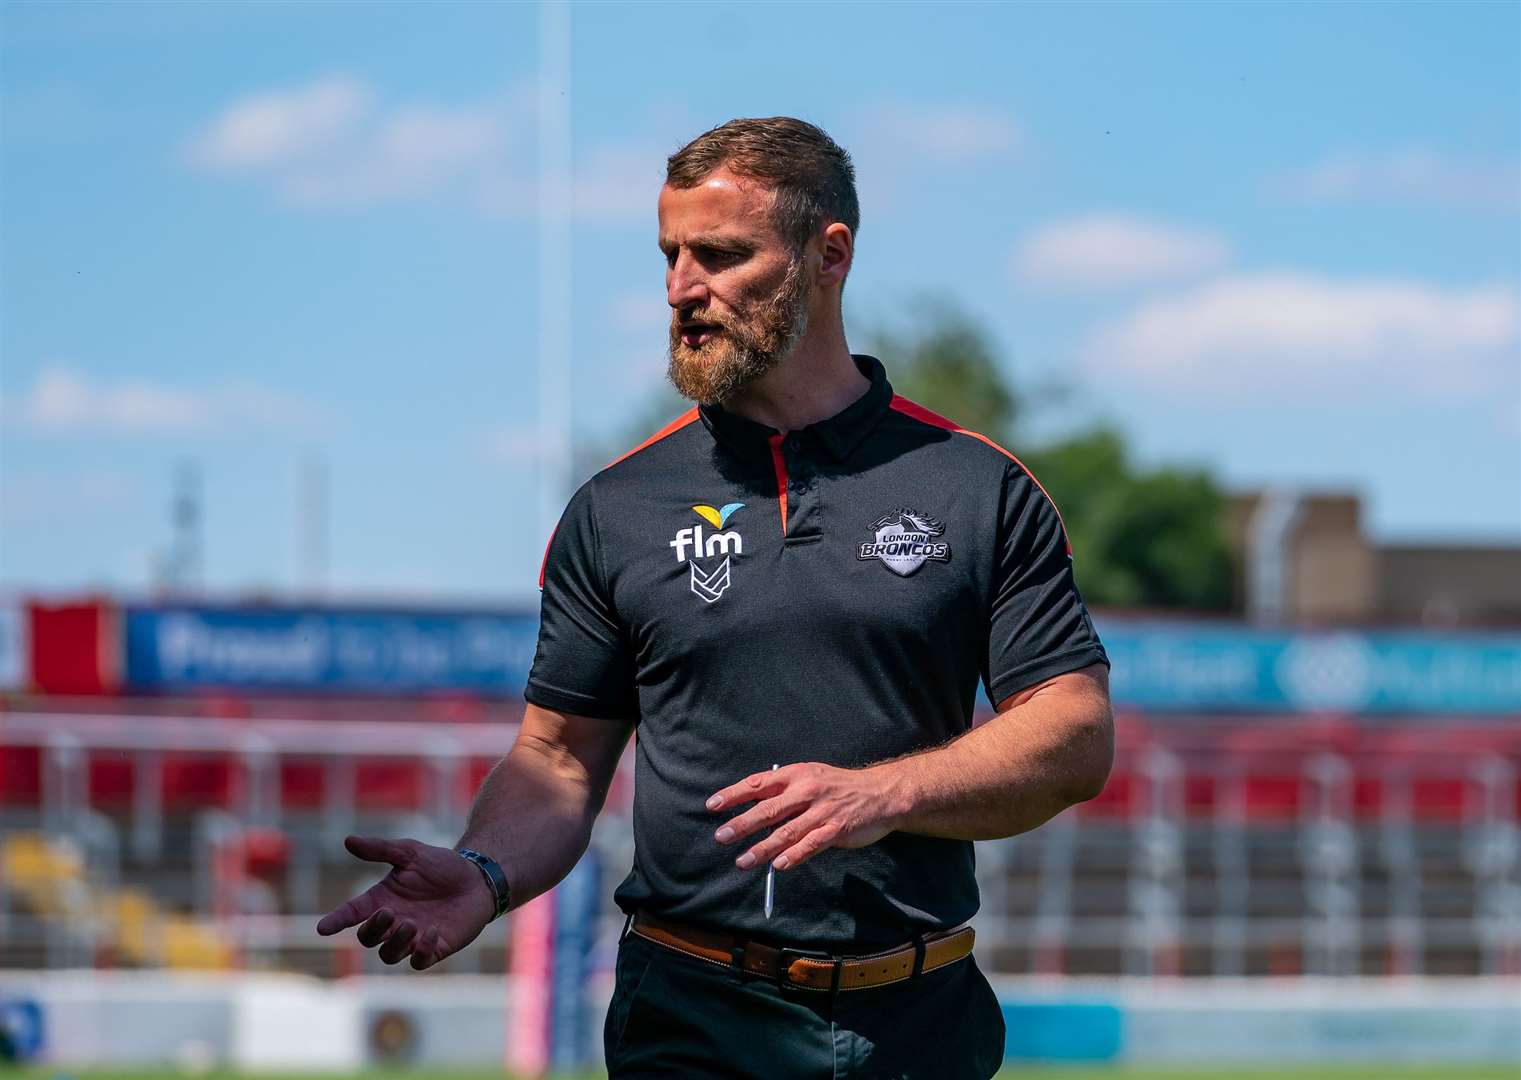 London Broncos' head Coach Mike Eccles ahead of the Betfred Championship match between London Broncos and Featherstone Rovers Picture: Liam McAvoy